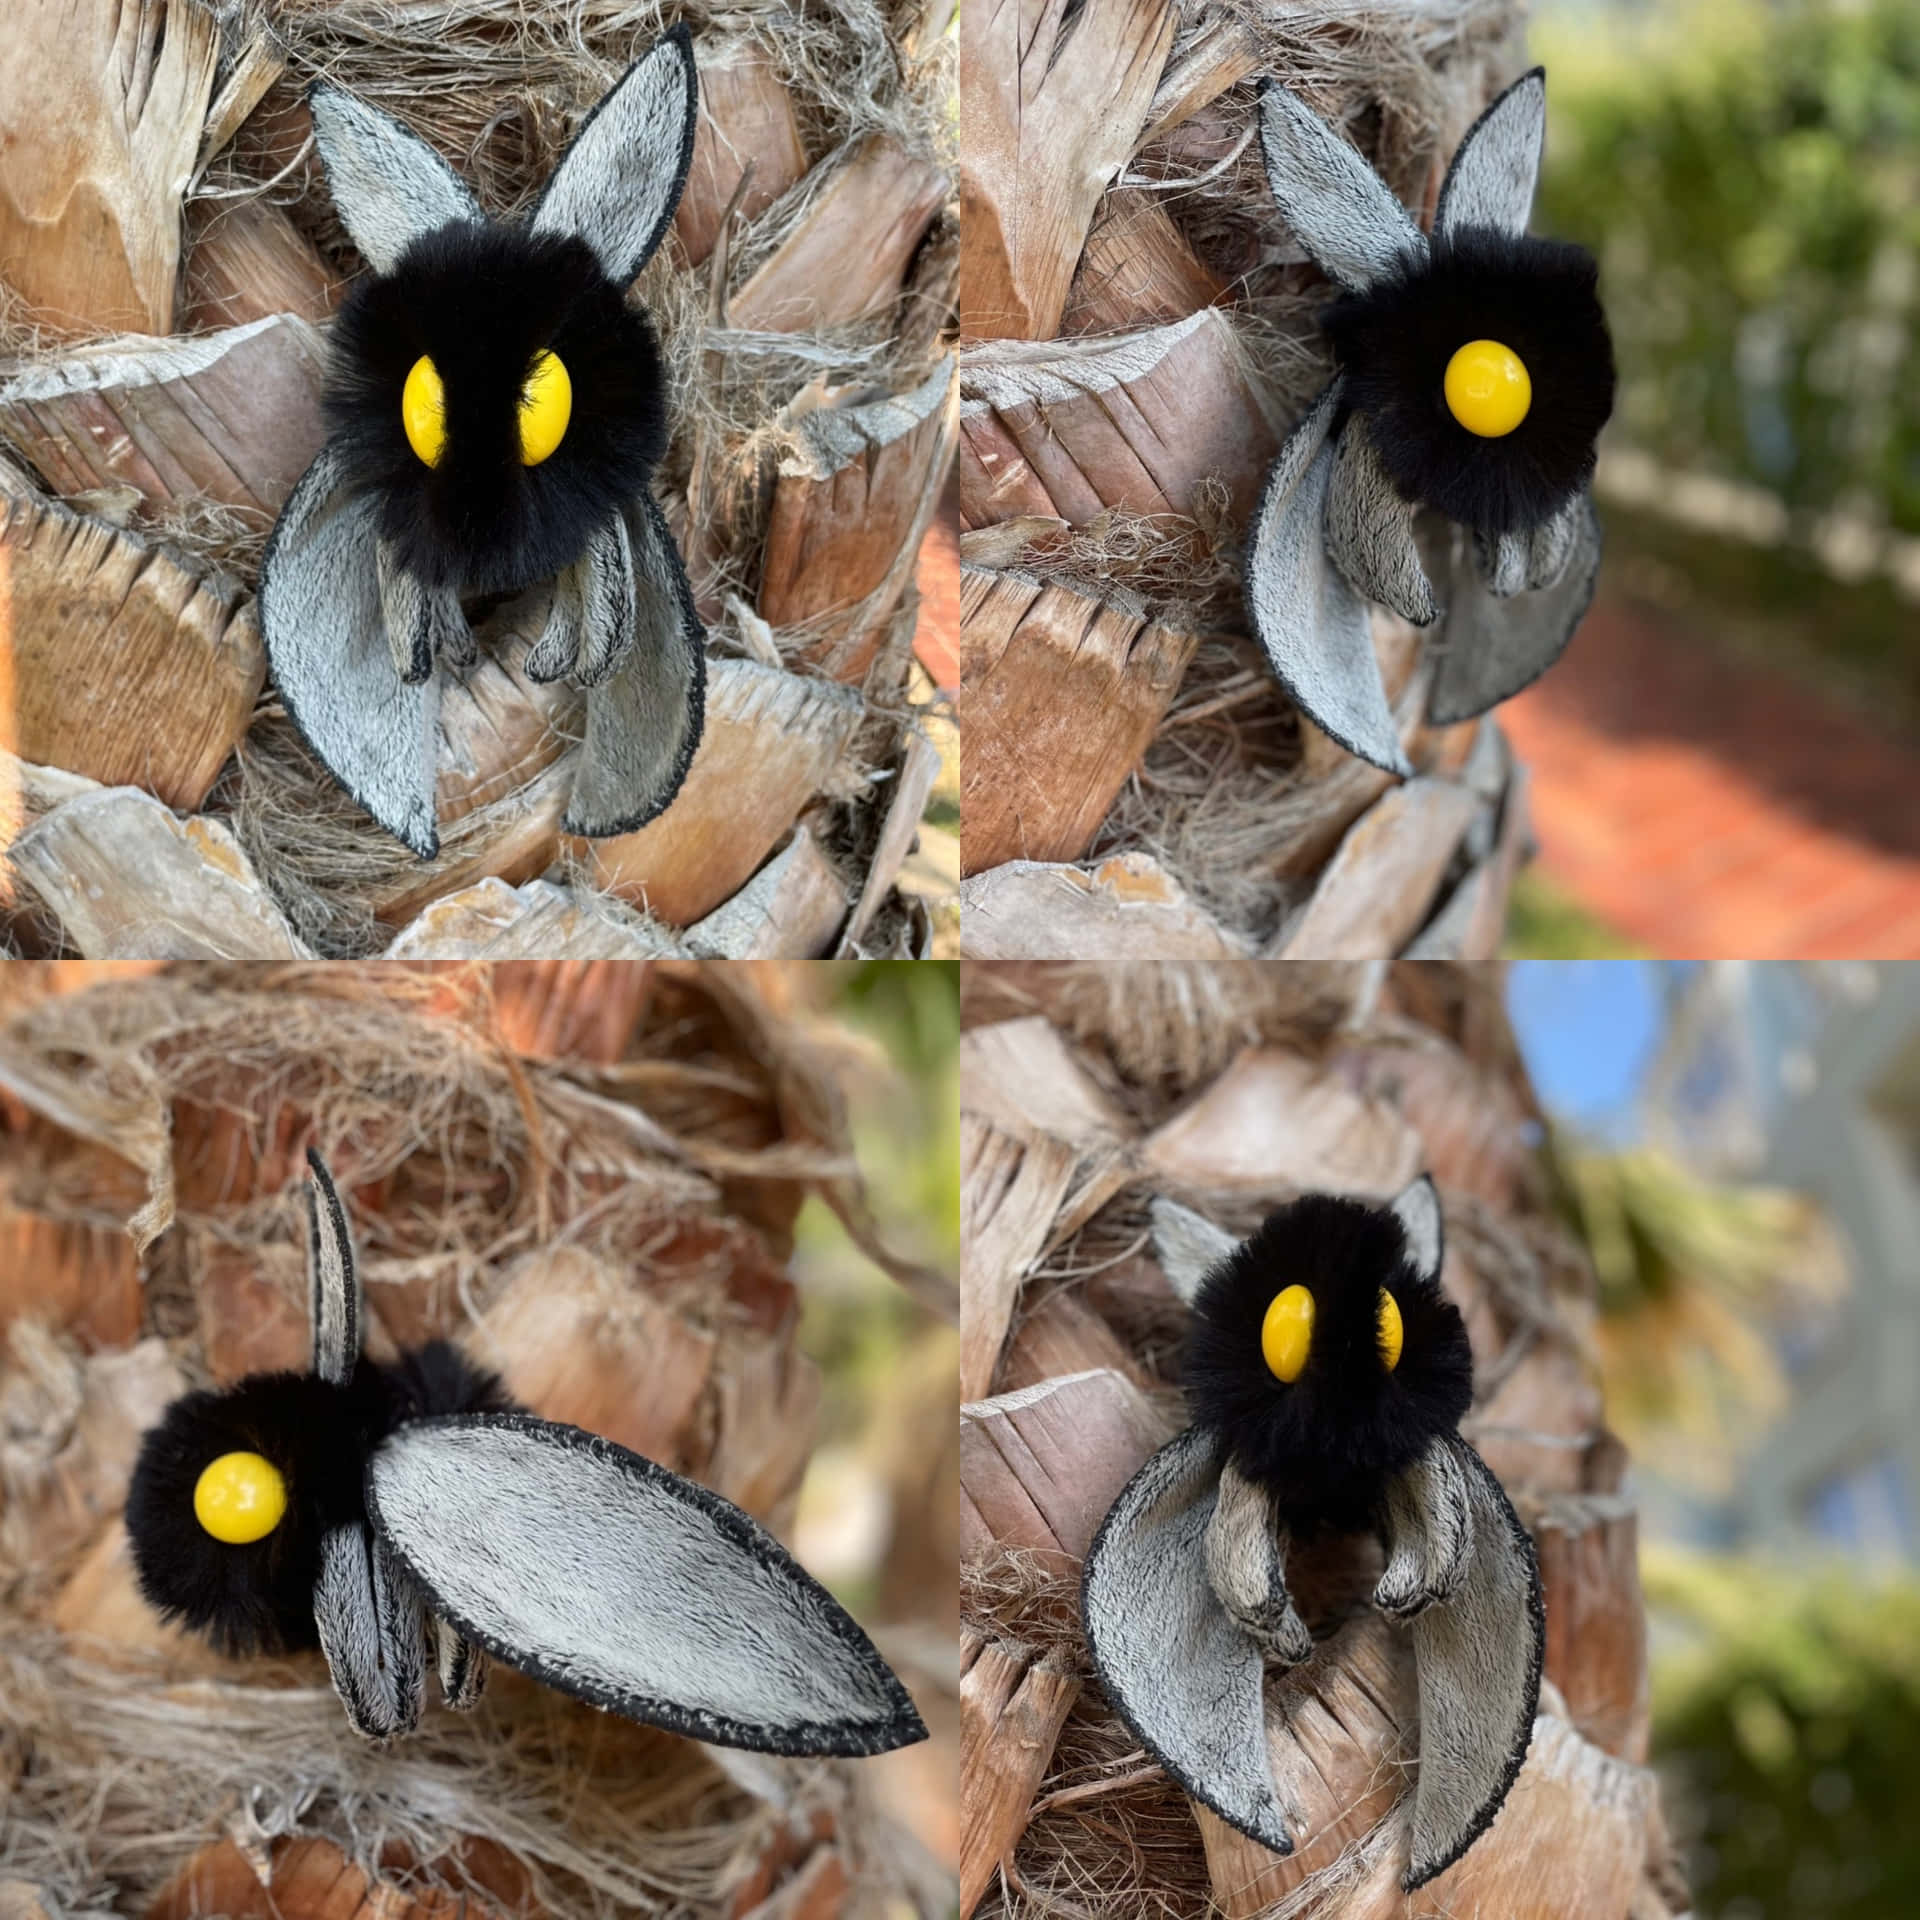 A Set Of Pictures Of A Stuffed Animal With Yellow Eyes